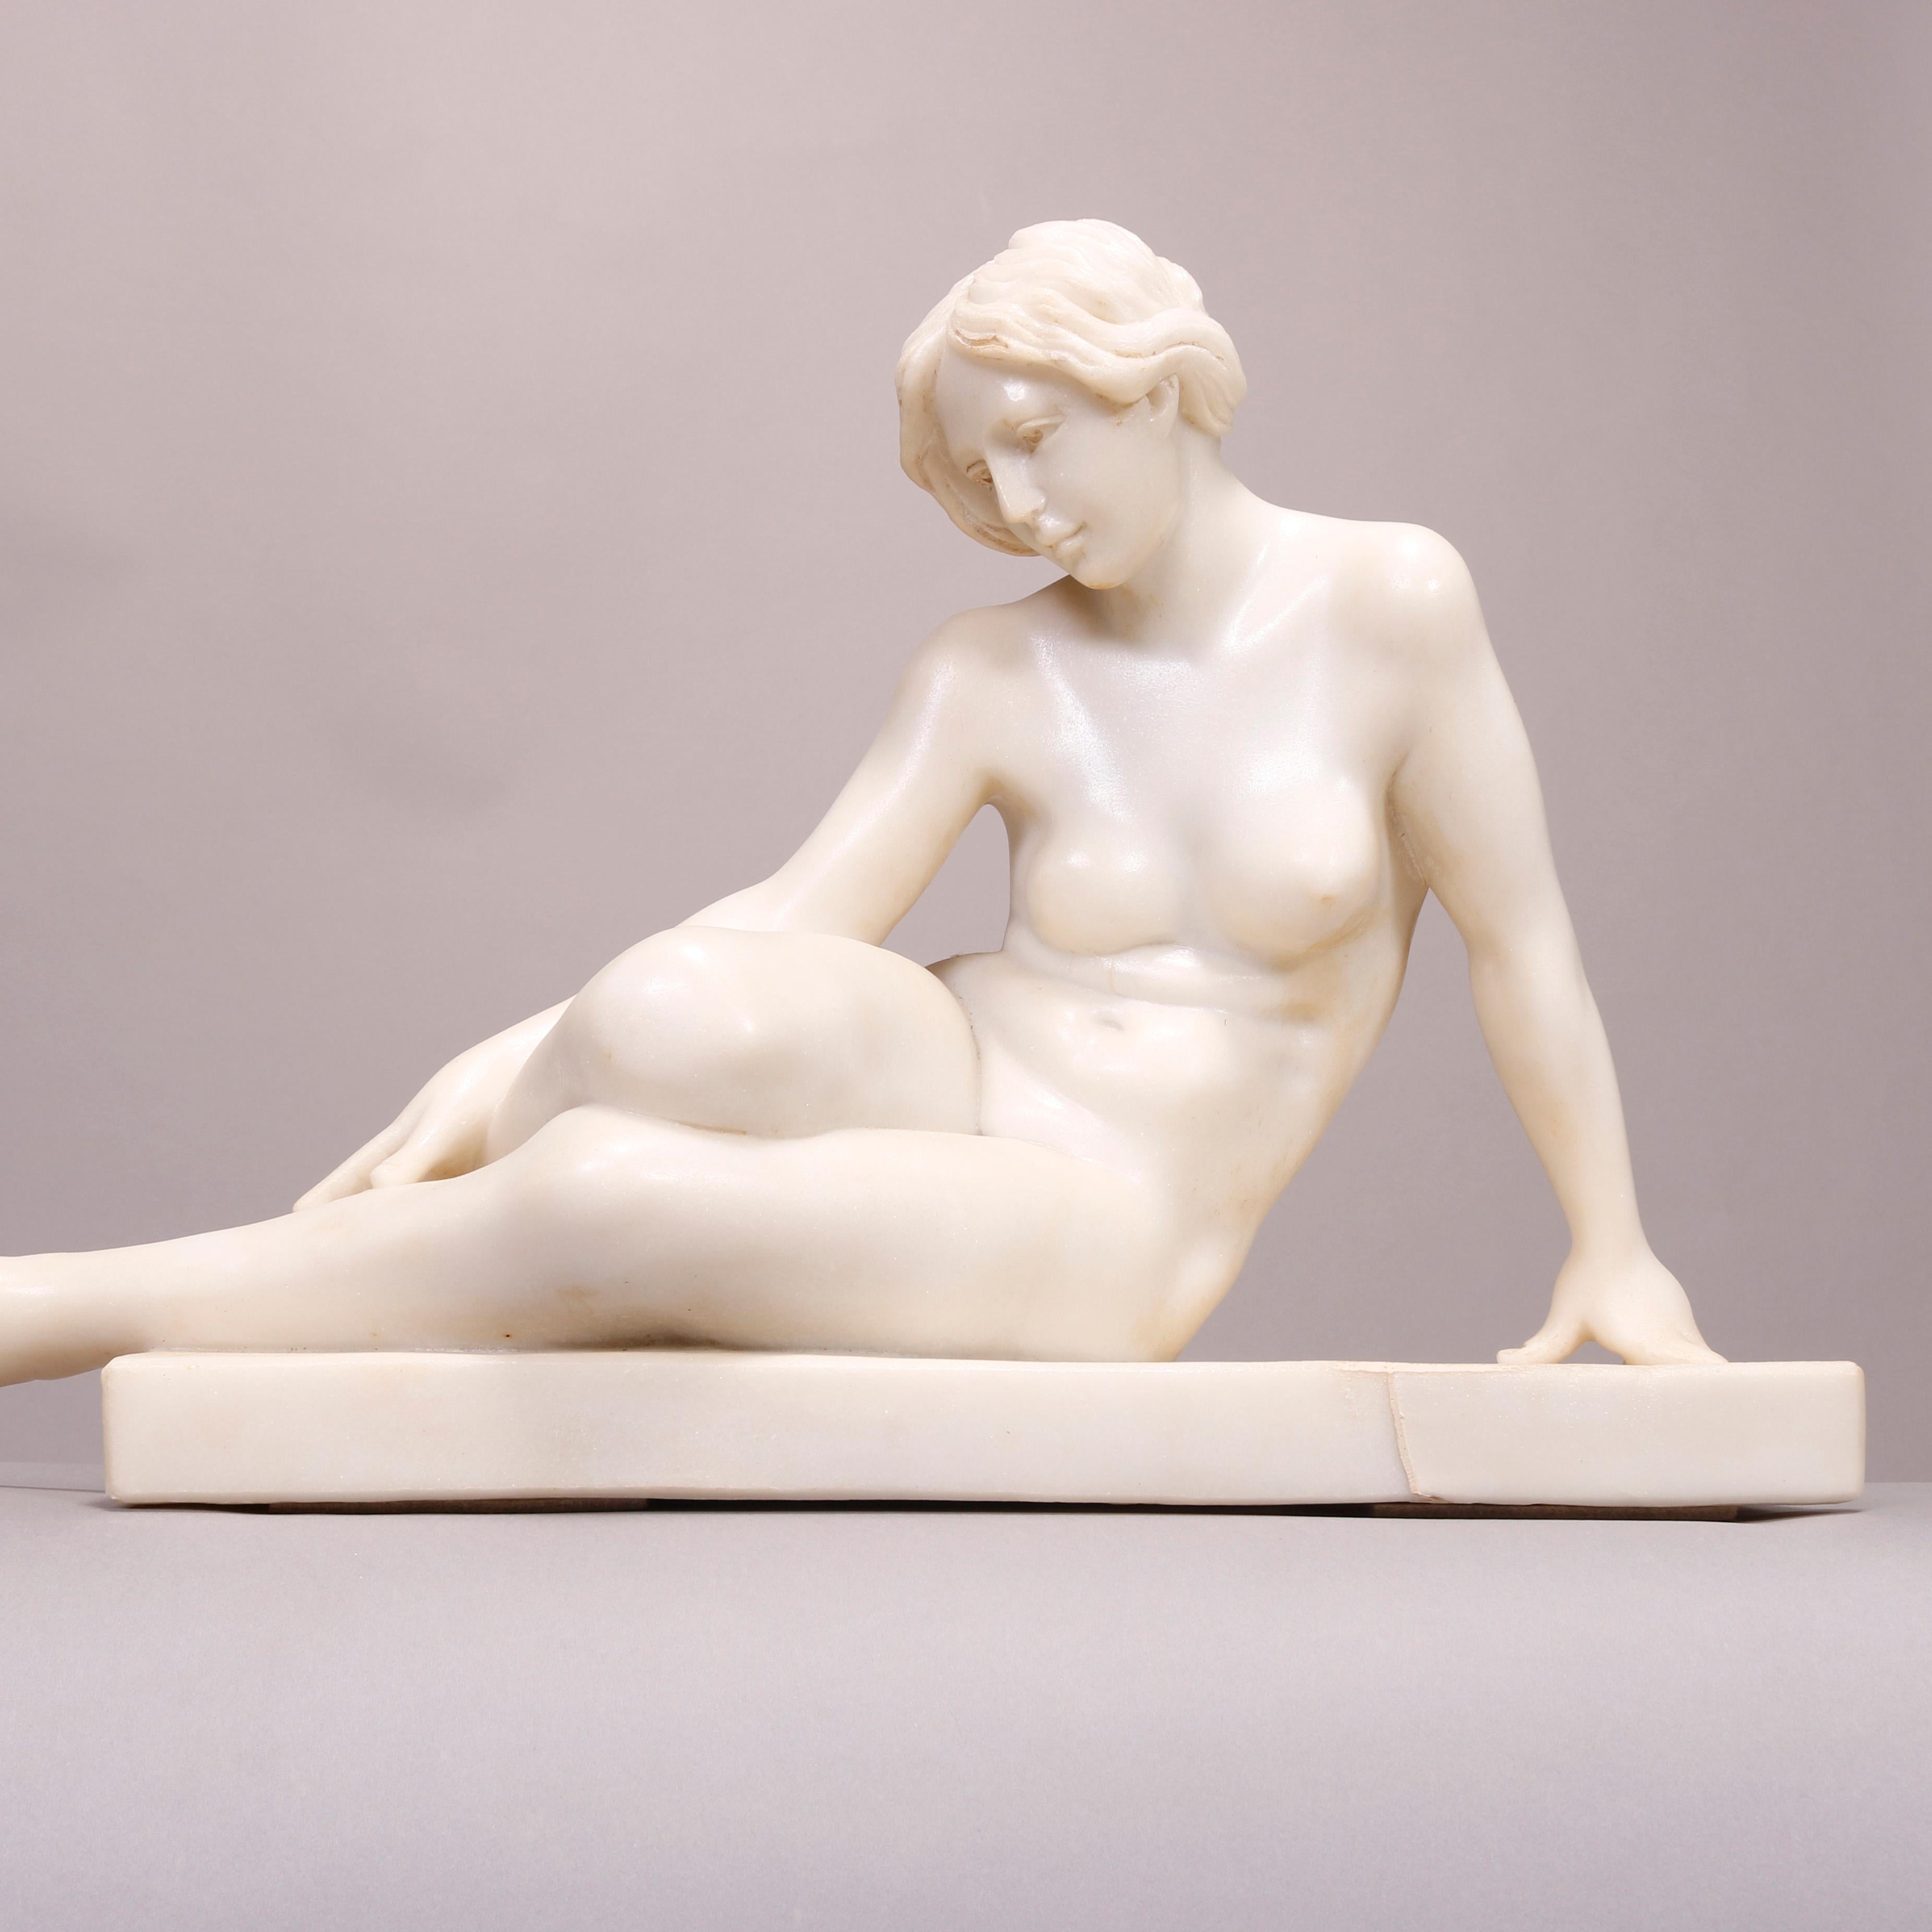 19th Century Art Deco Recumbent Carved Alabaster Nude Portrait Sculpture, Early 20th Century